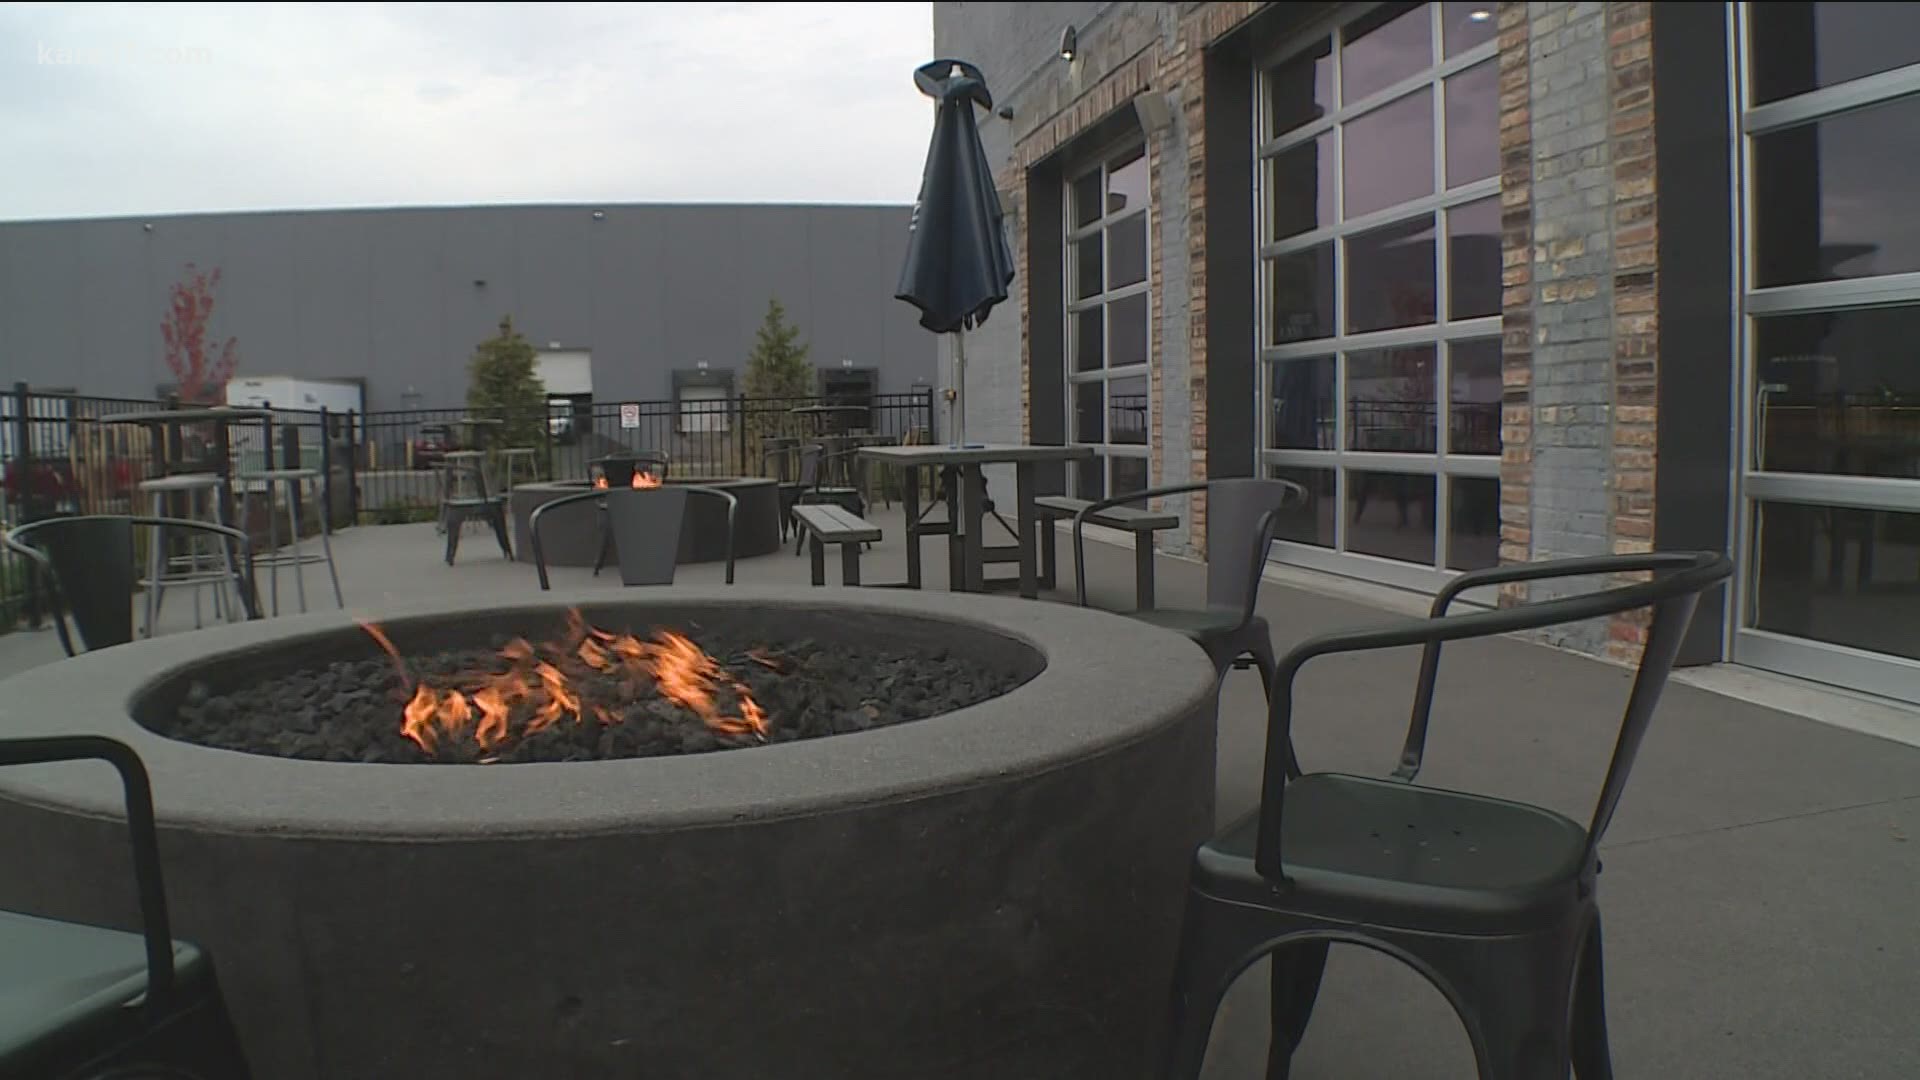 With COVID-19 threatening the hospitality industry, some are investing in ways to expand safe outdoor dining.